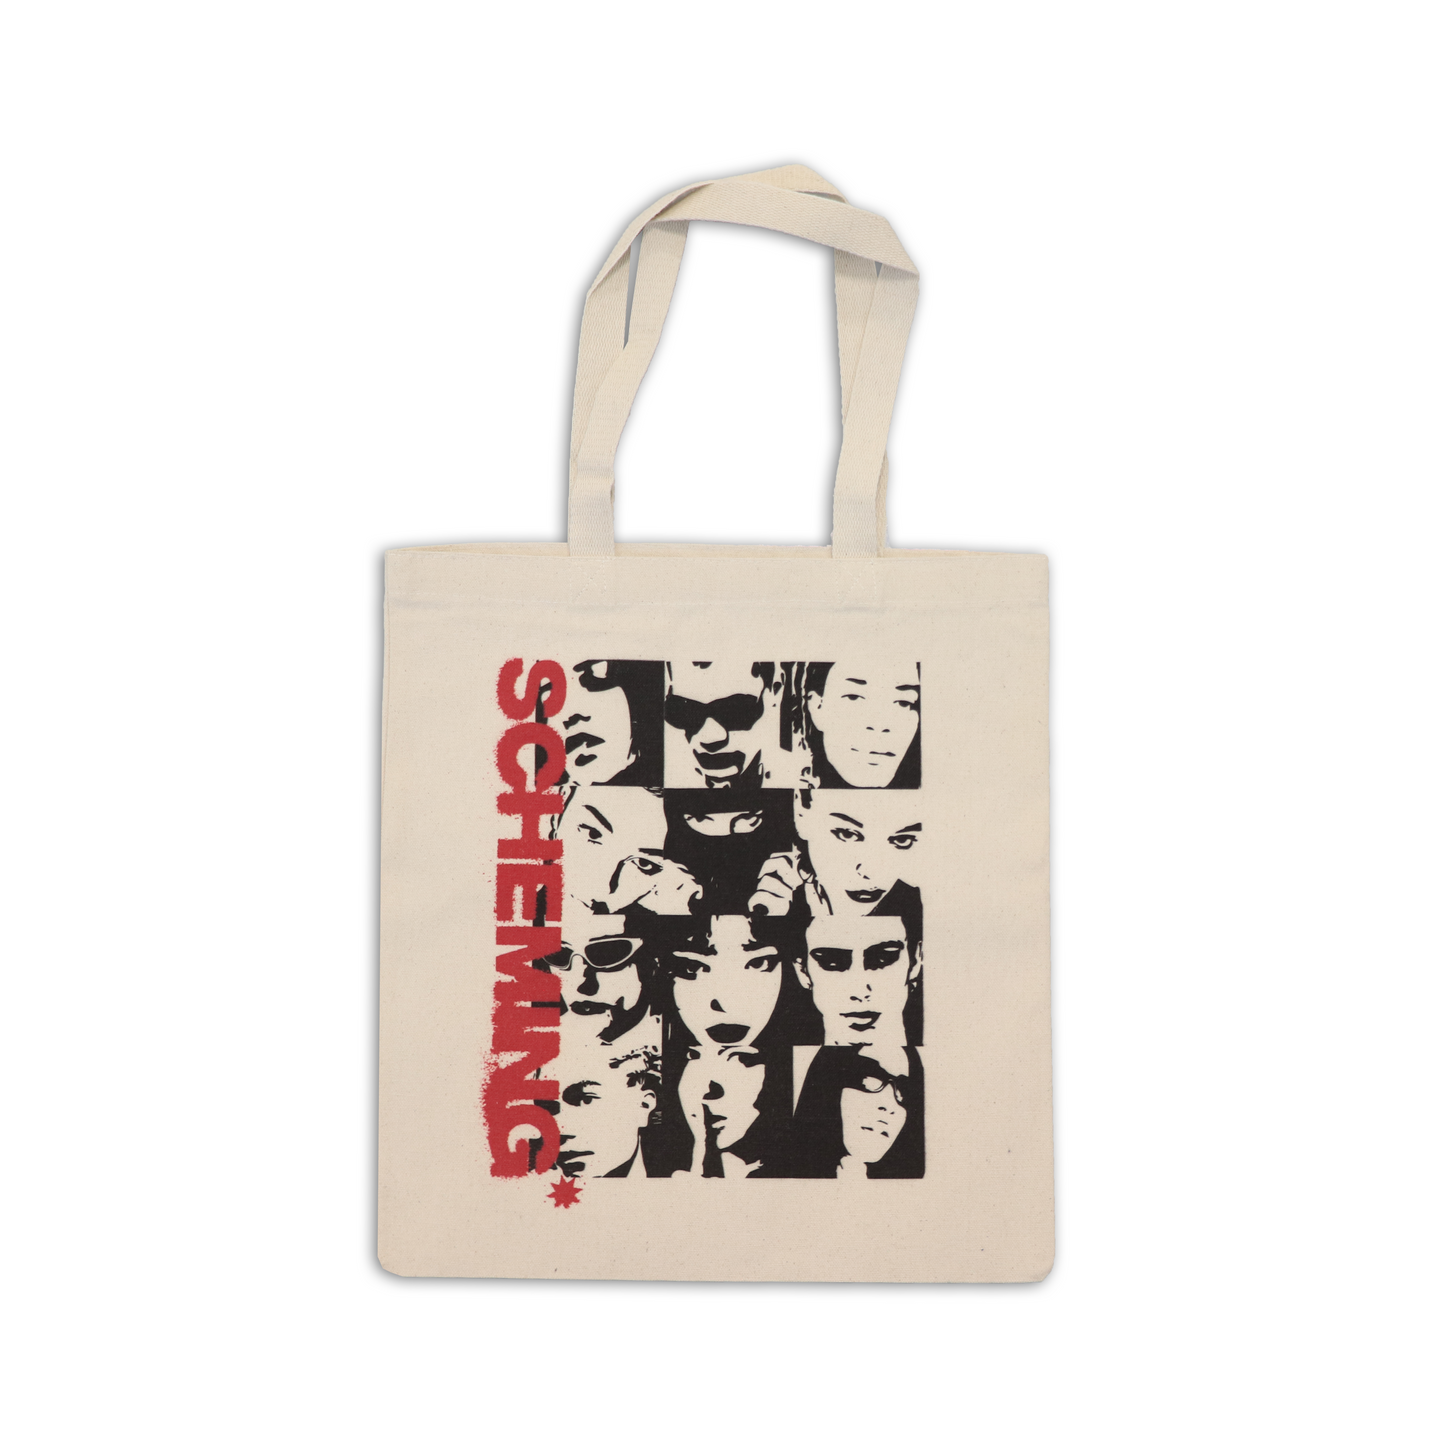 Faces Tote Bag - Scheming Co.